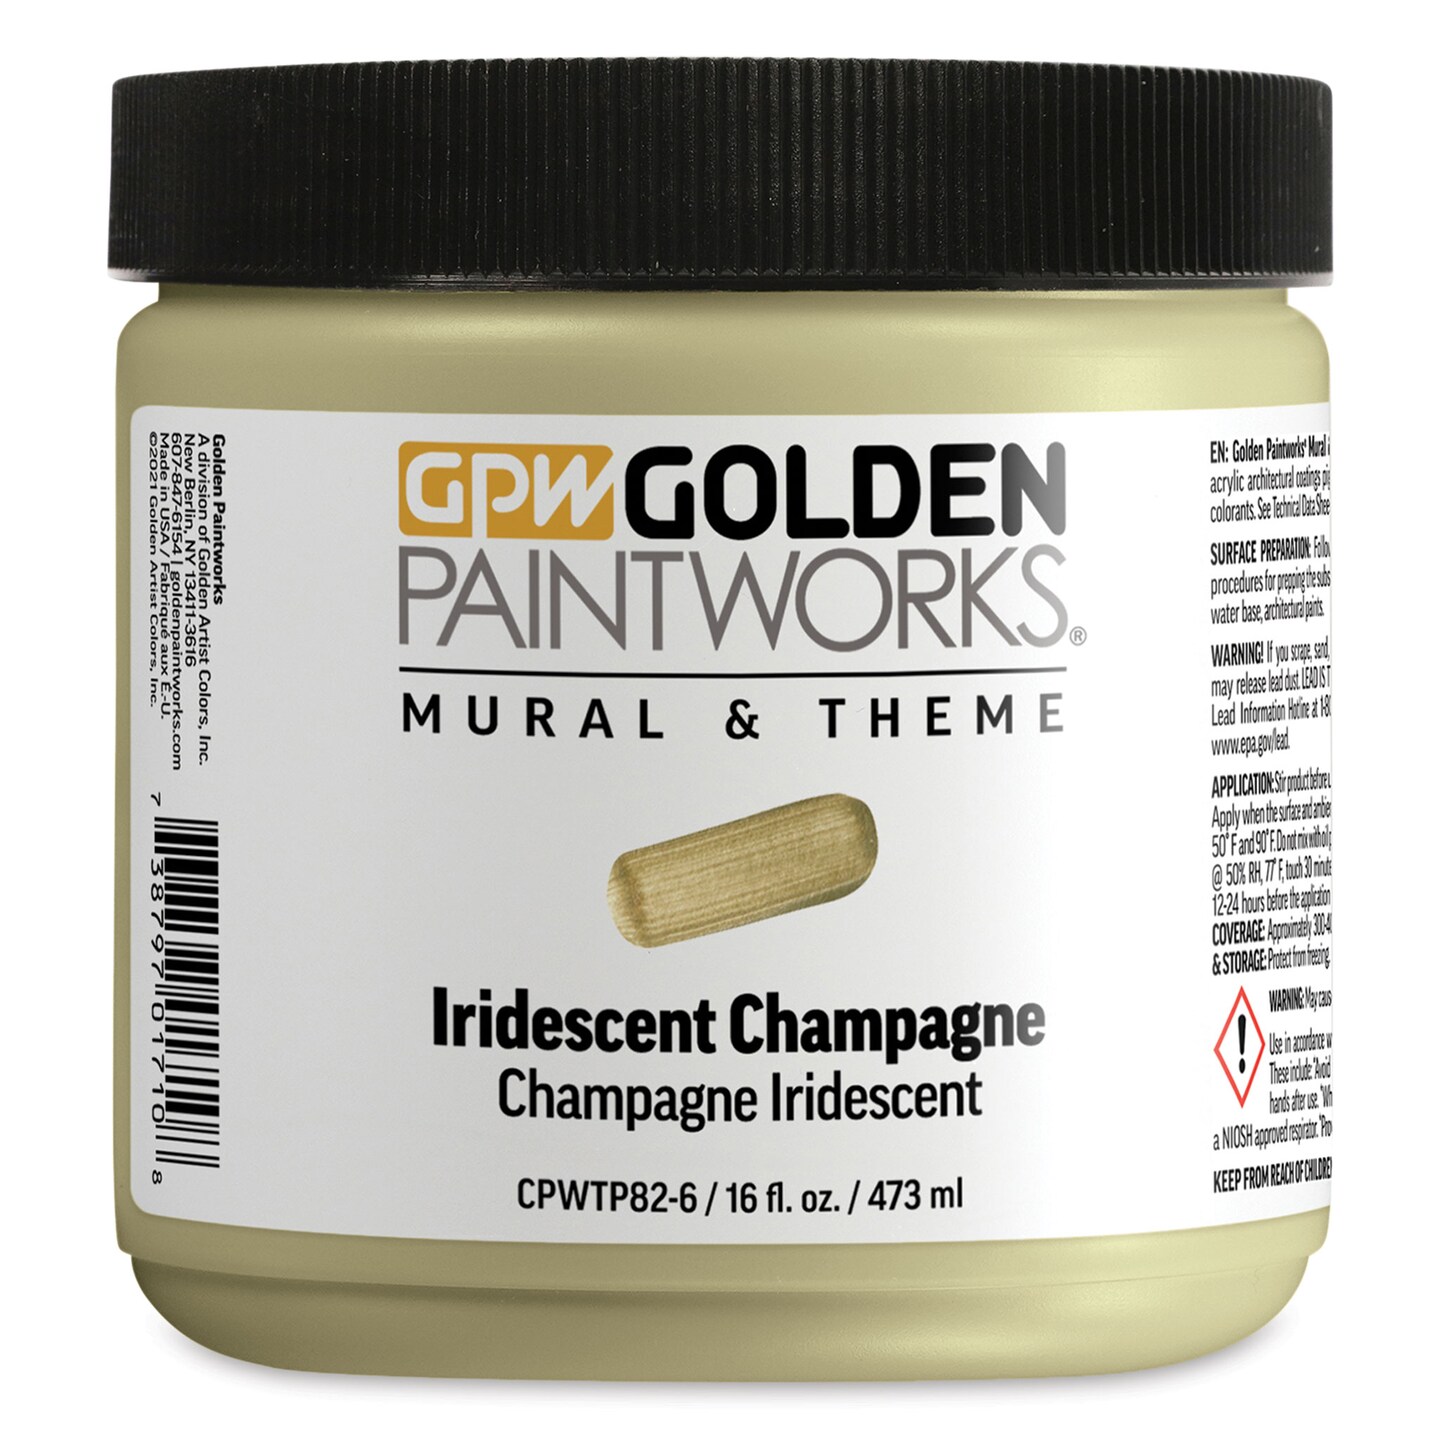 Golden Paintworks Mural and Theme Acrylic Paint - Iridescent